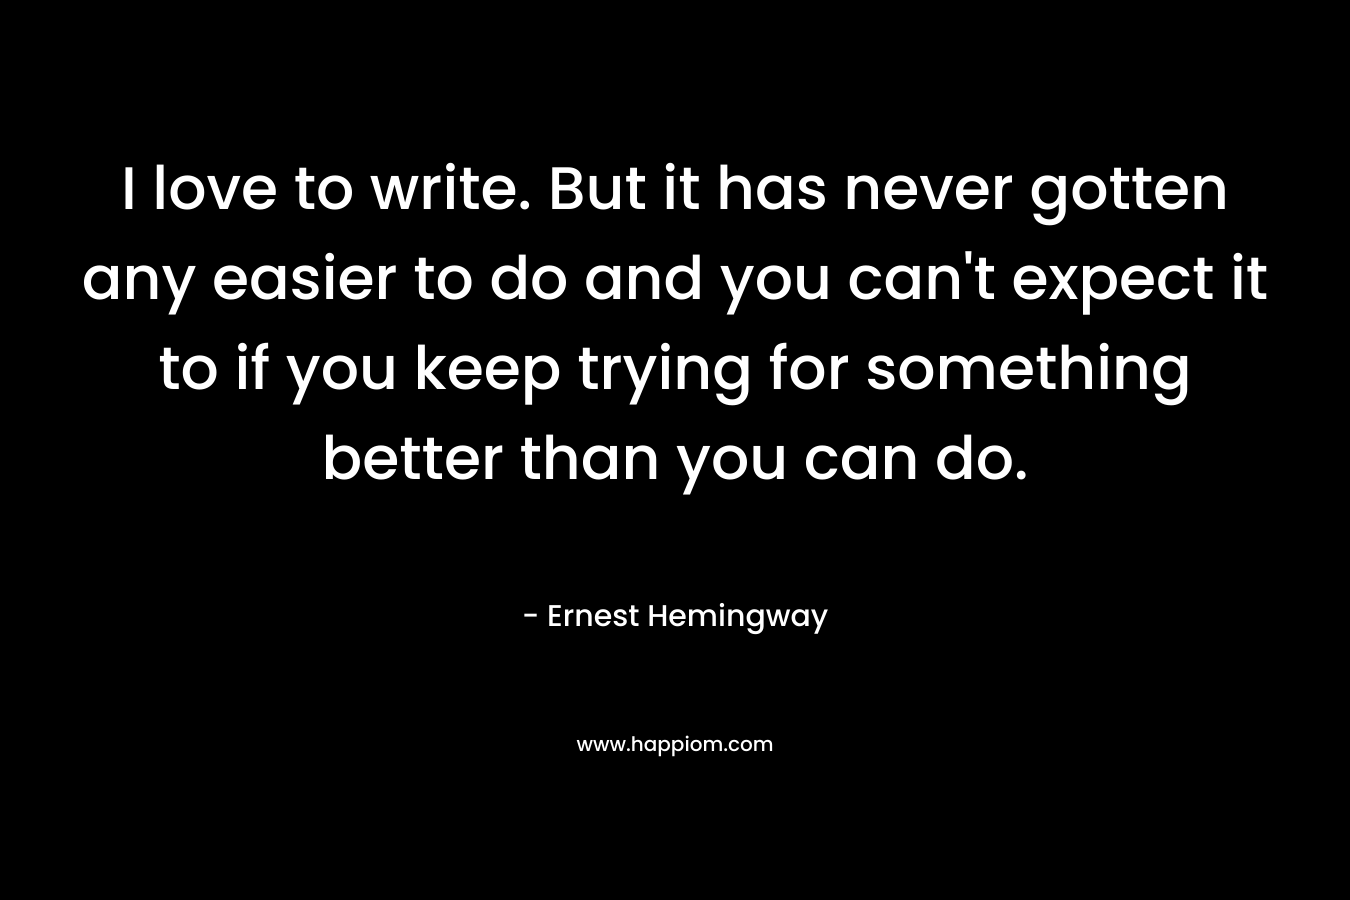 I love to write. But it has never gotten any easier to do and you can't expect it to if you keep trying for something better than you can do.